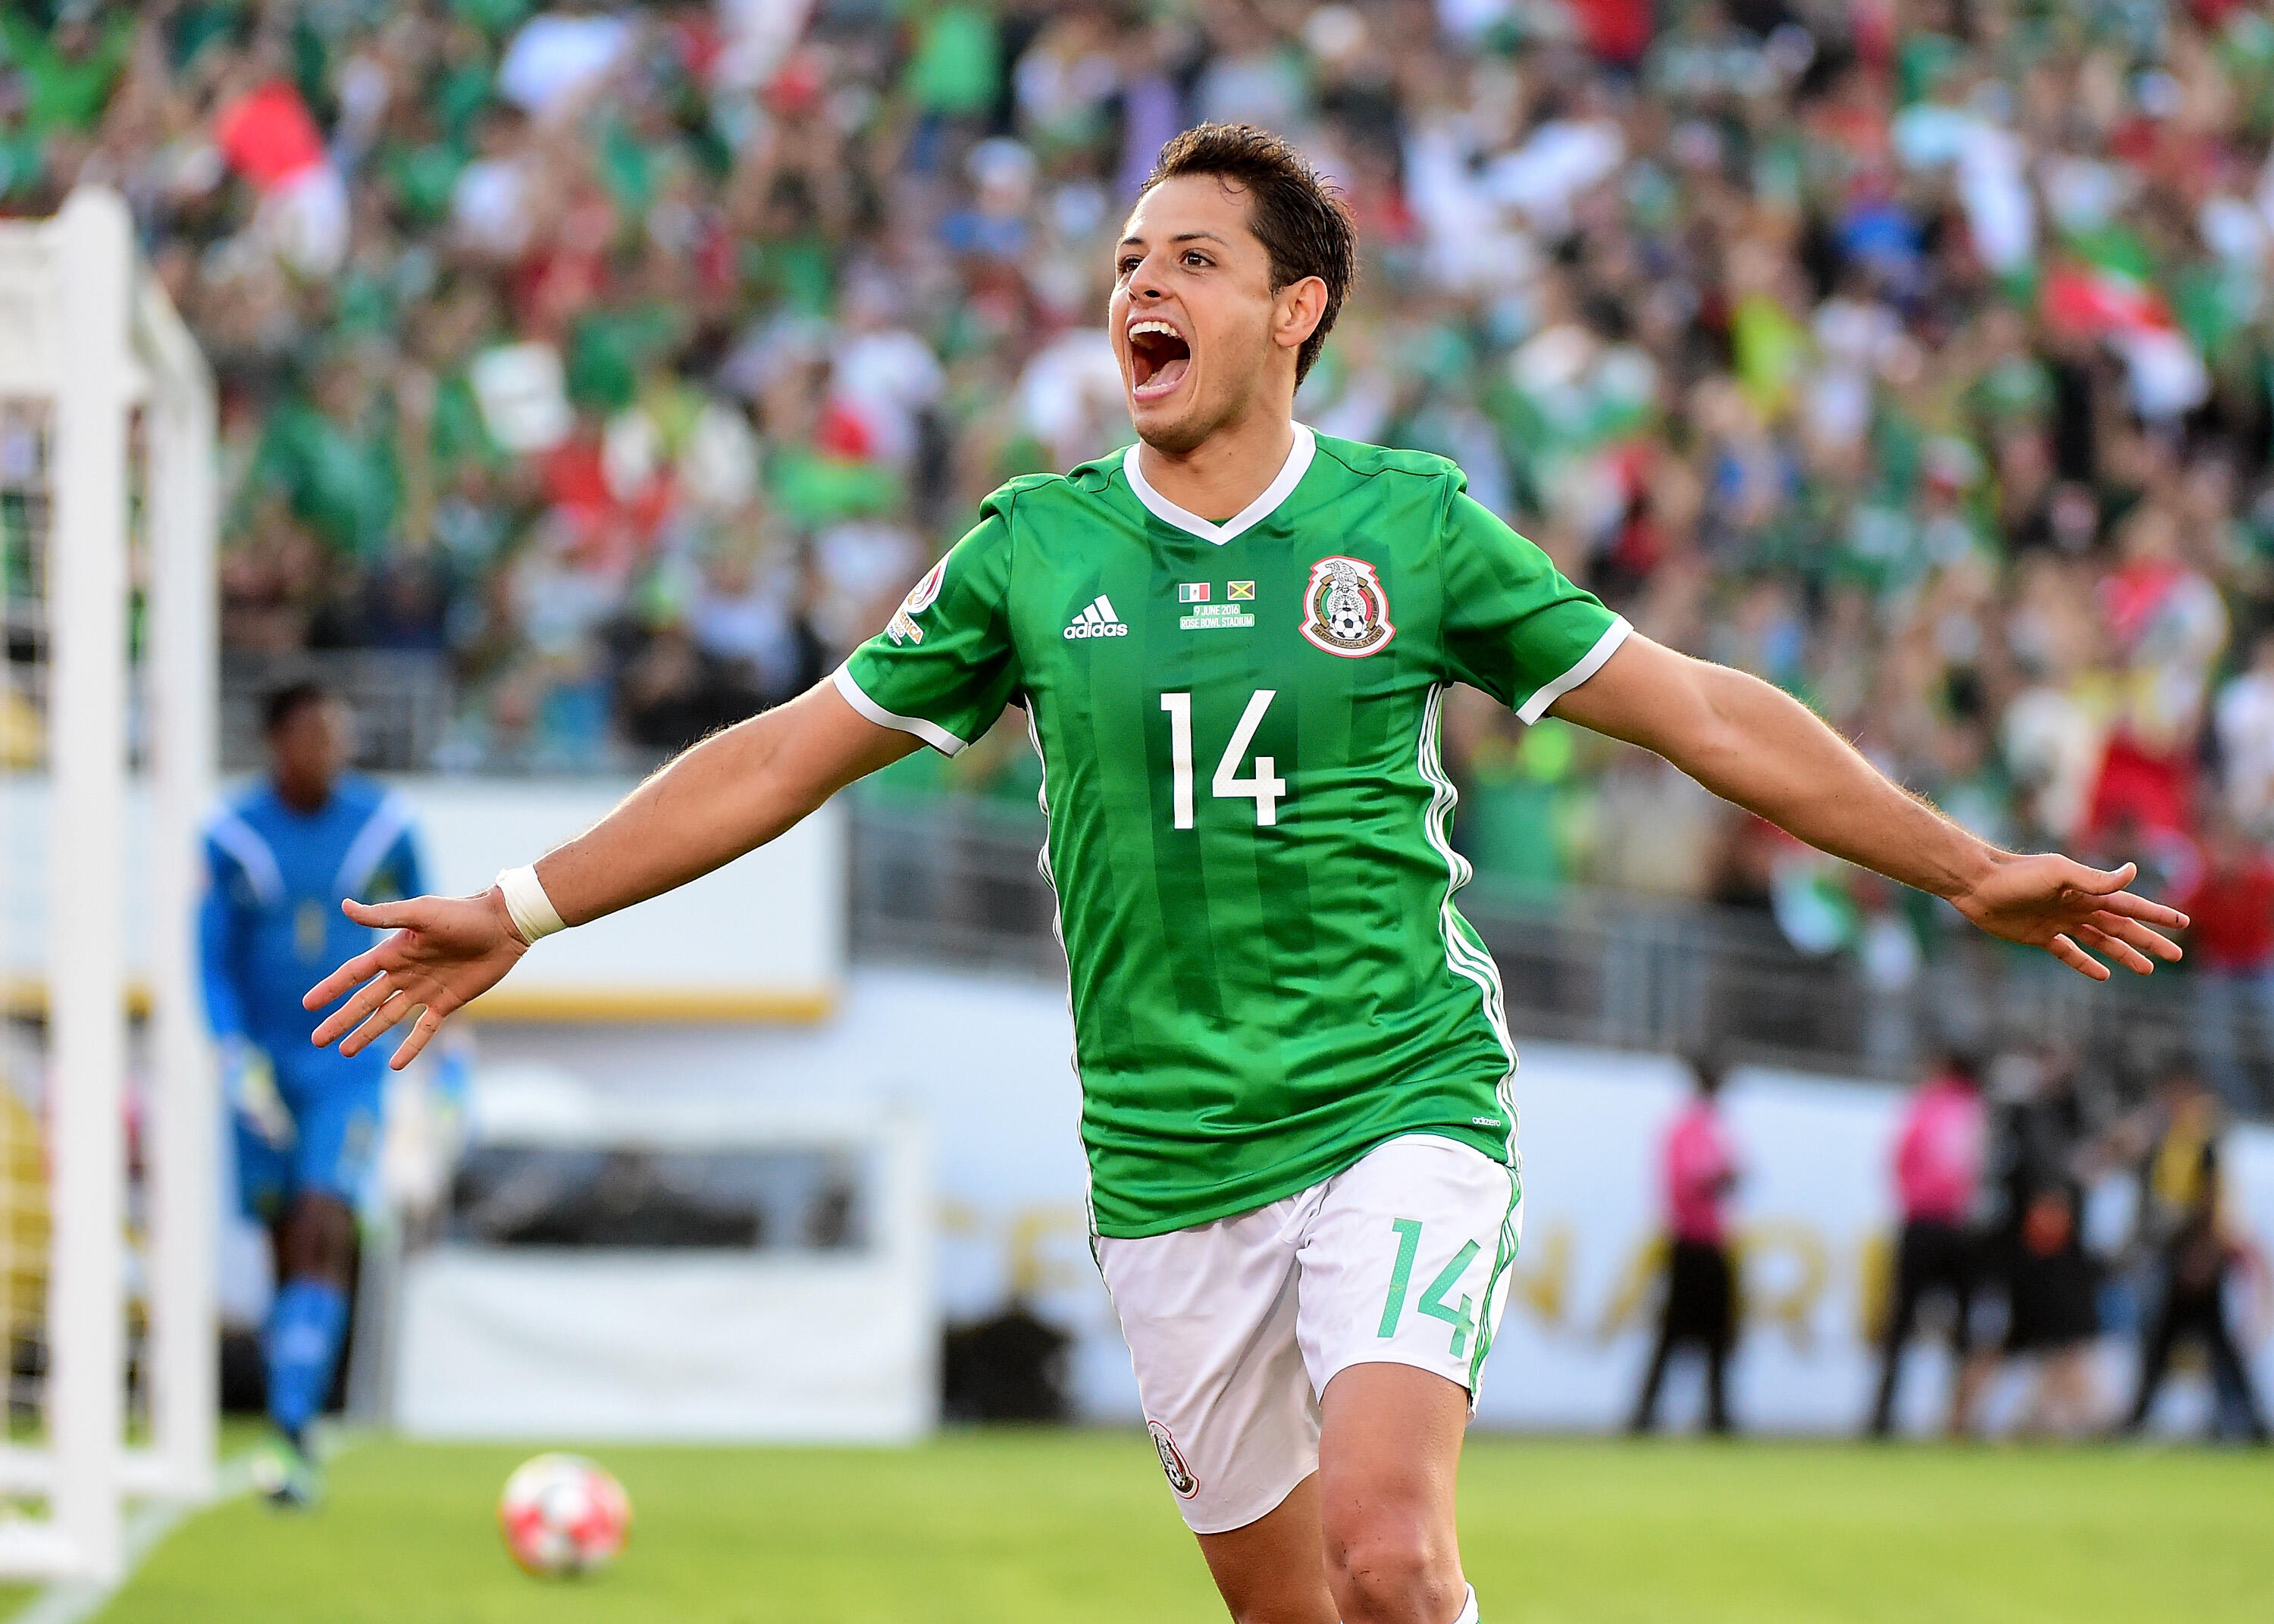 PASADENA, CA - JUNE 09:  Chicharito #14 of Mexico celebrates after his goal in front of Andre Blake #1 of Jamaica to take a 1-0 lead during Copa America Centenario at the Rose Bowl on June 9, 2016 in Pasadena, California.  (Photo by Harry How/Getty Images